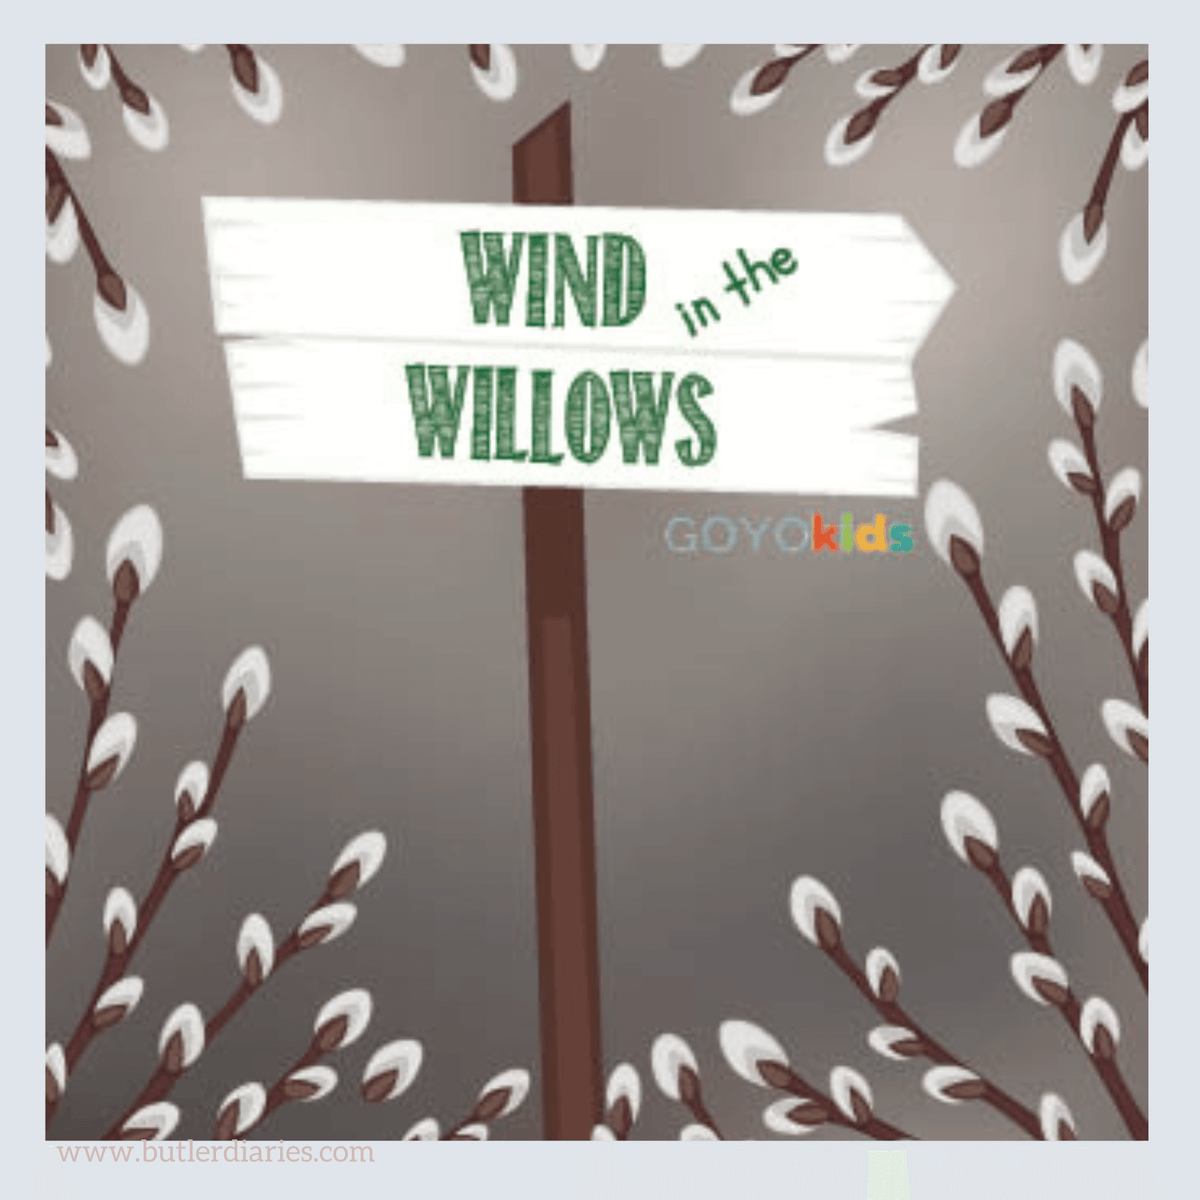 Yoga Story - The Wind in the Willows - Butler Diaries